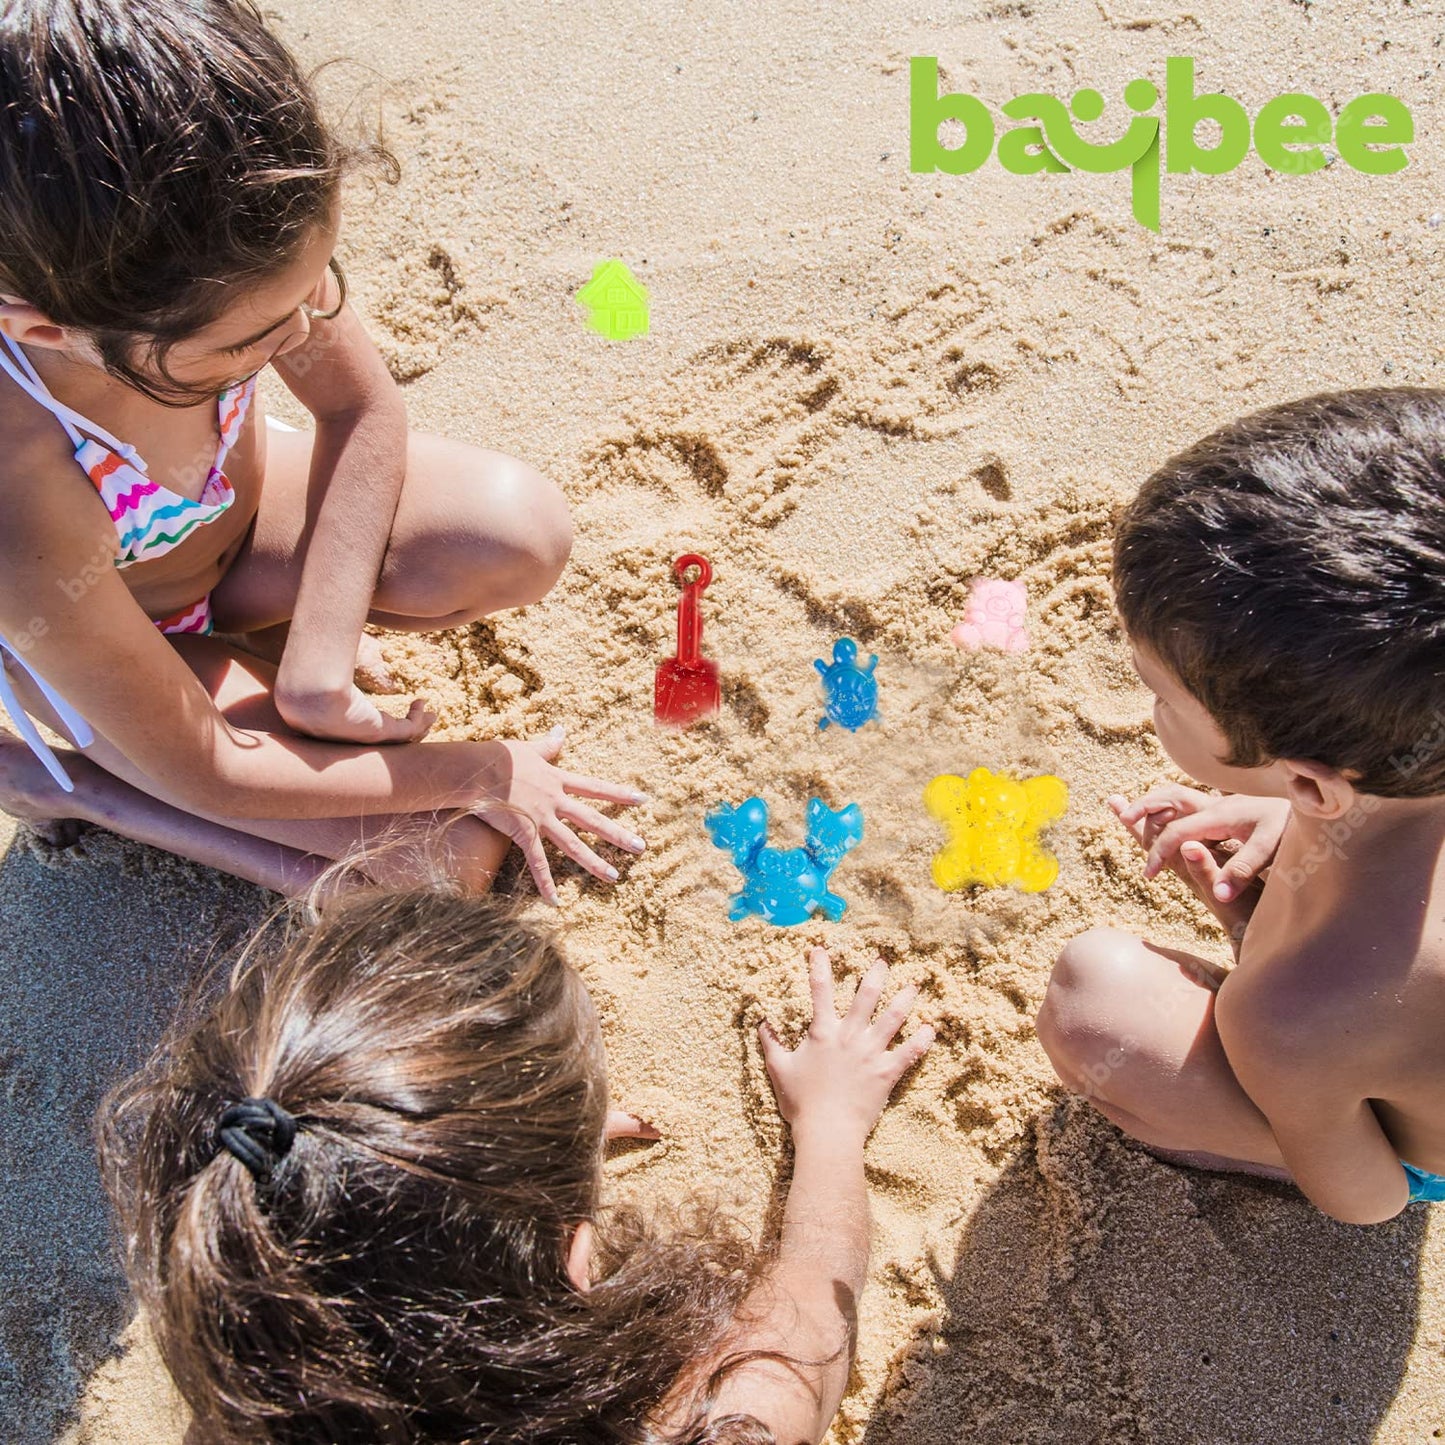 BAYBEE Creative Play Sand for Kids 1Kg, Moldable Magic Sand Dough Activity Toys Set, Sand Clay for Kids to Play